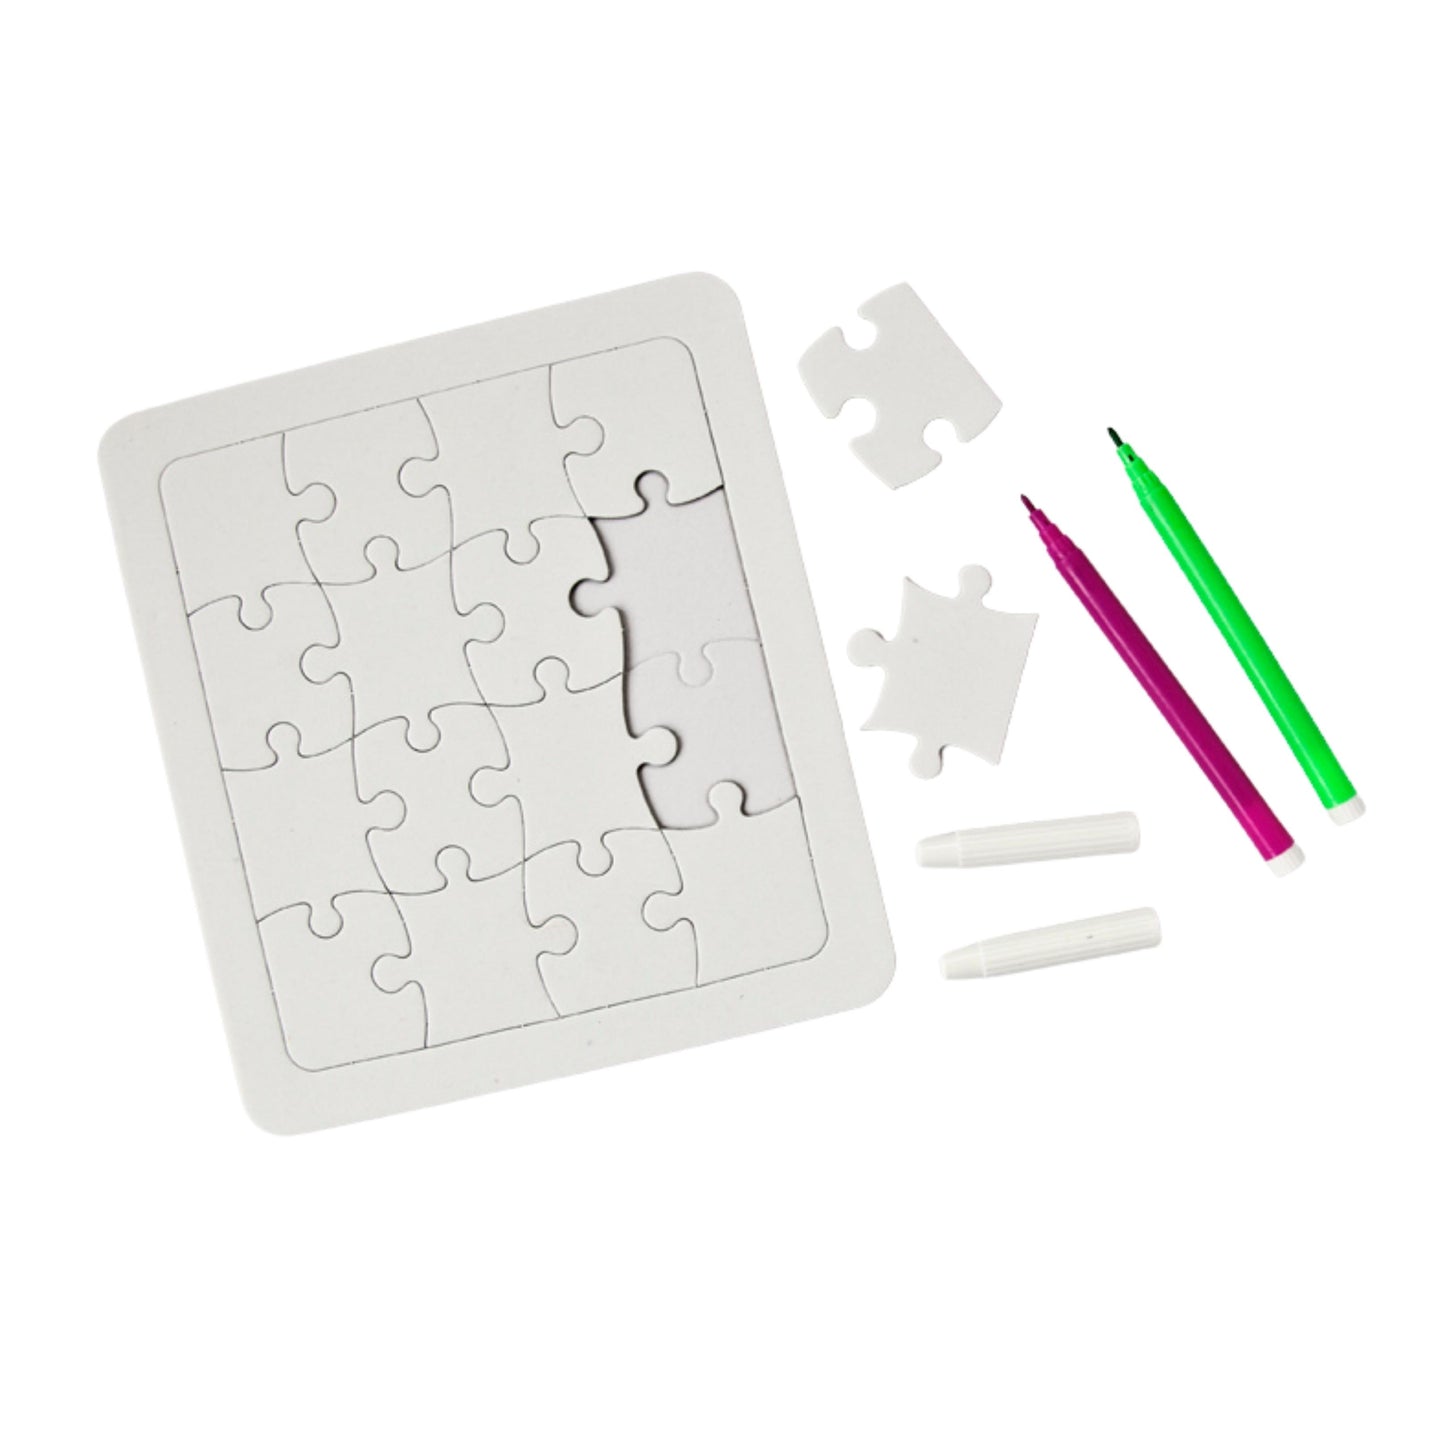 Make Your Own Puzzle Set - Square